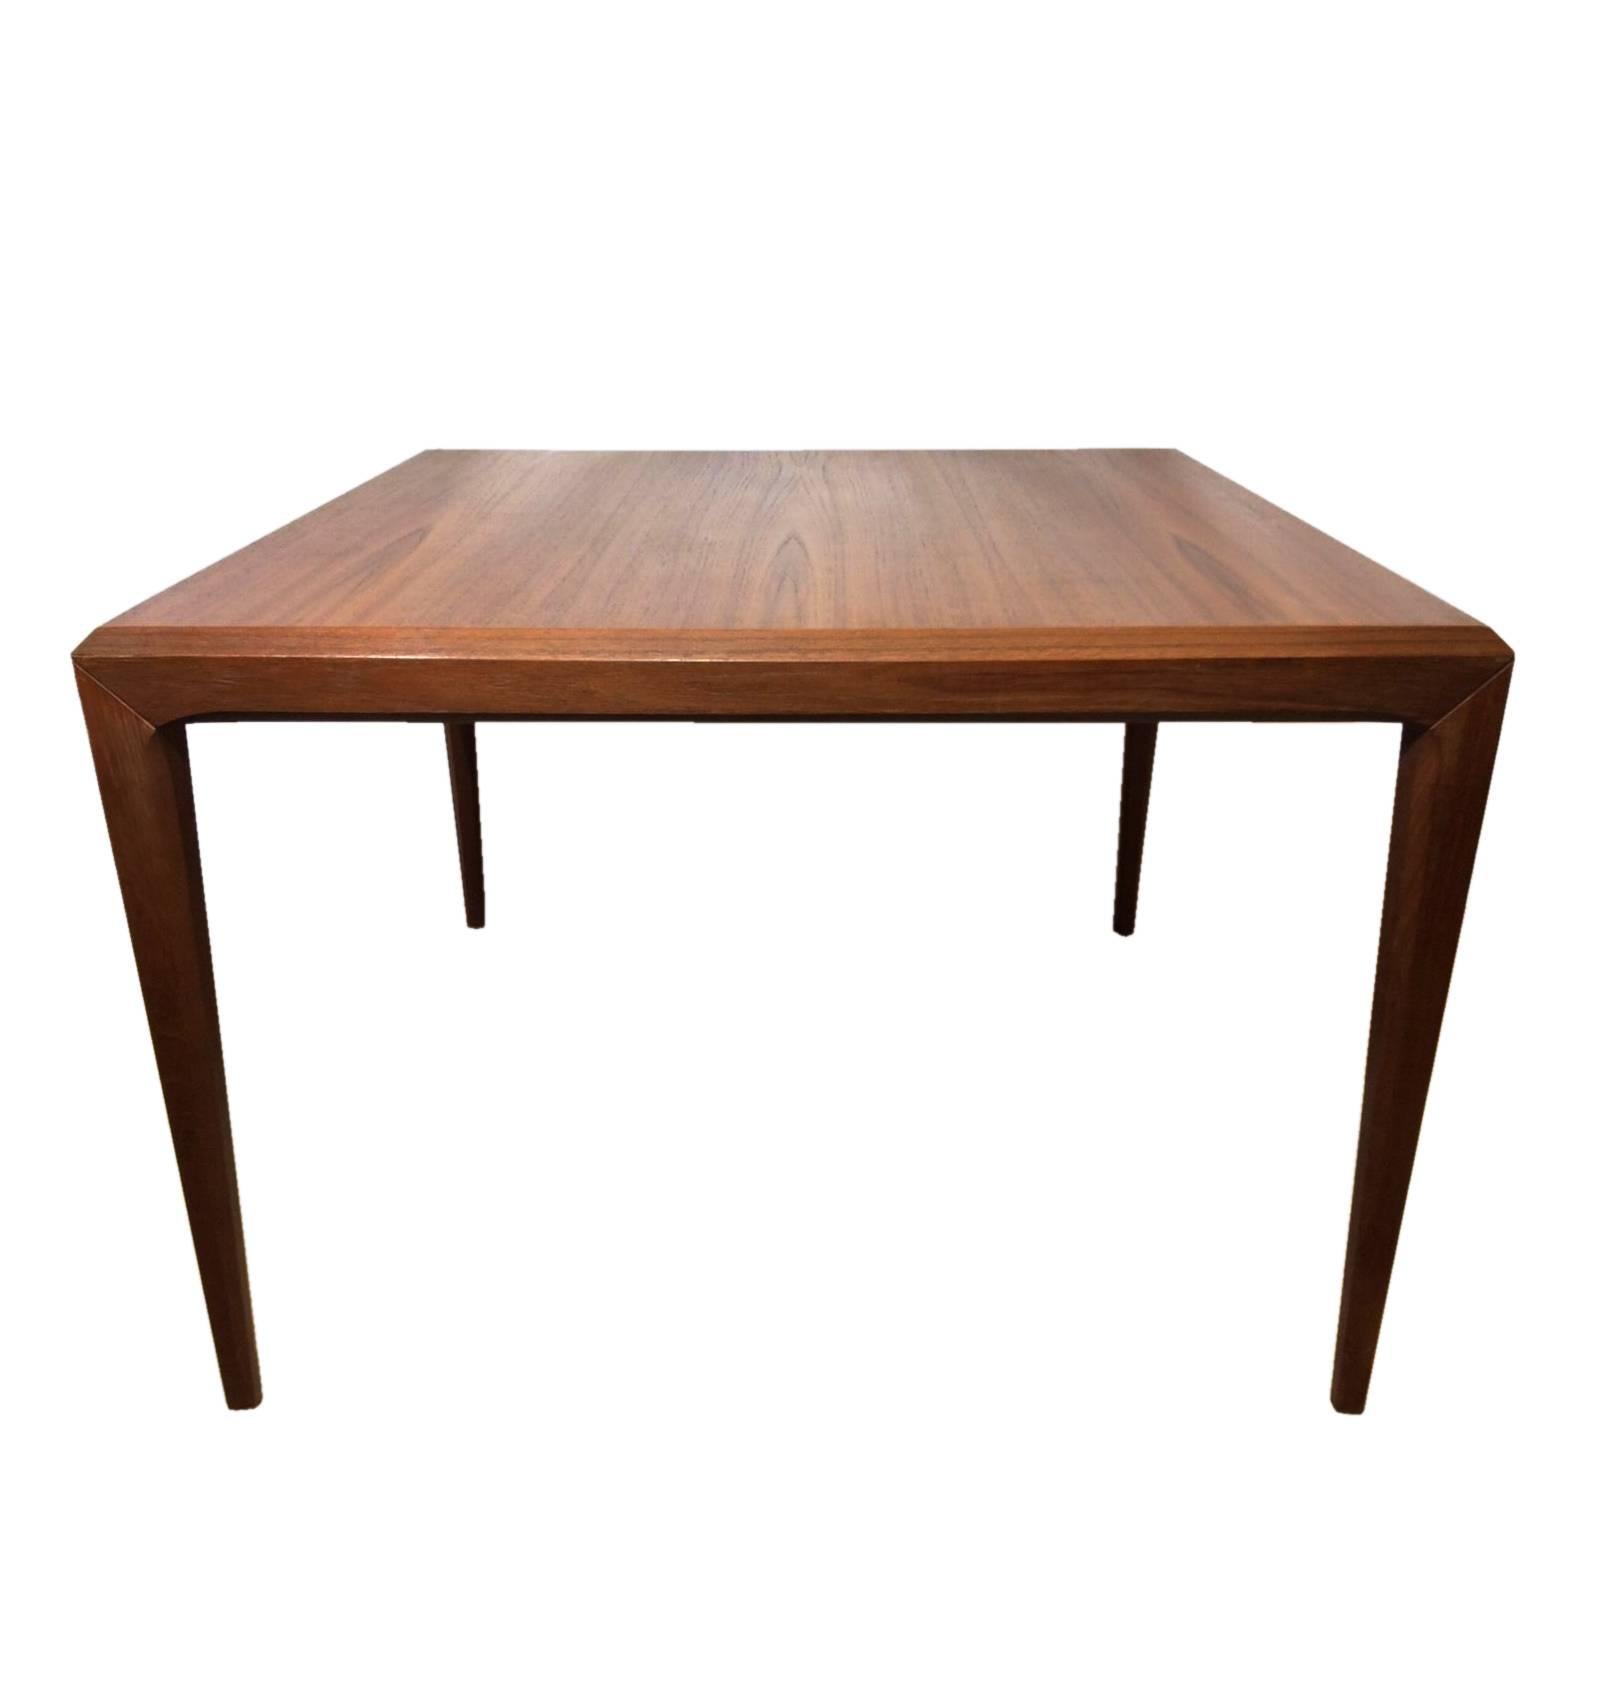 Danish Mid-Century Cubic Teak Coffee Table by Johannes Andersen for Silkeborg For Sale 1